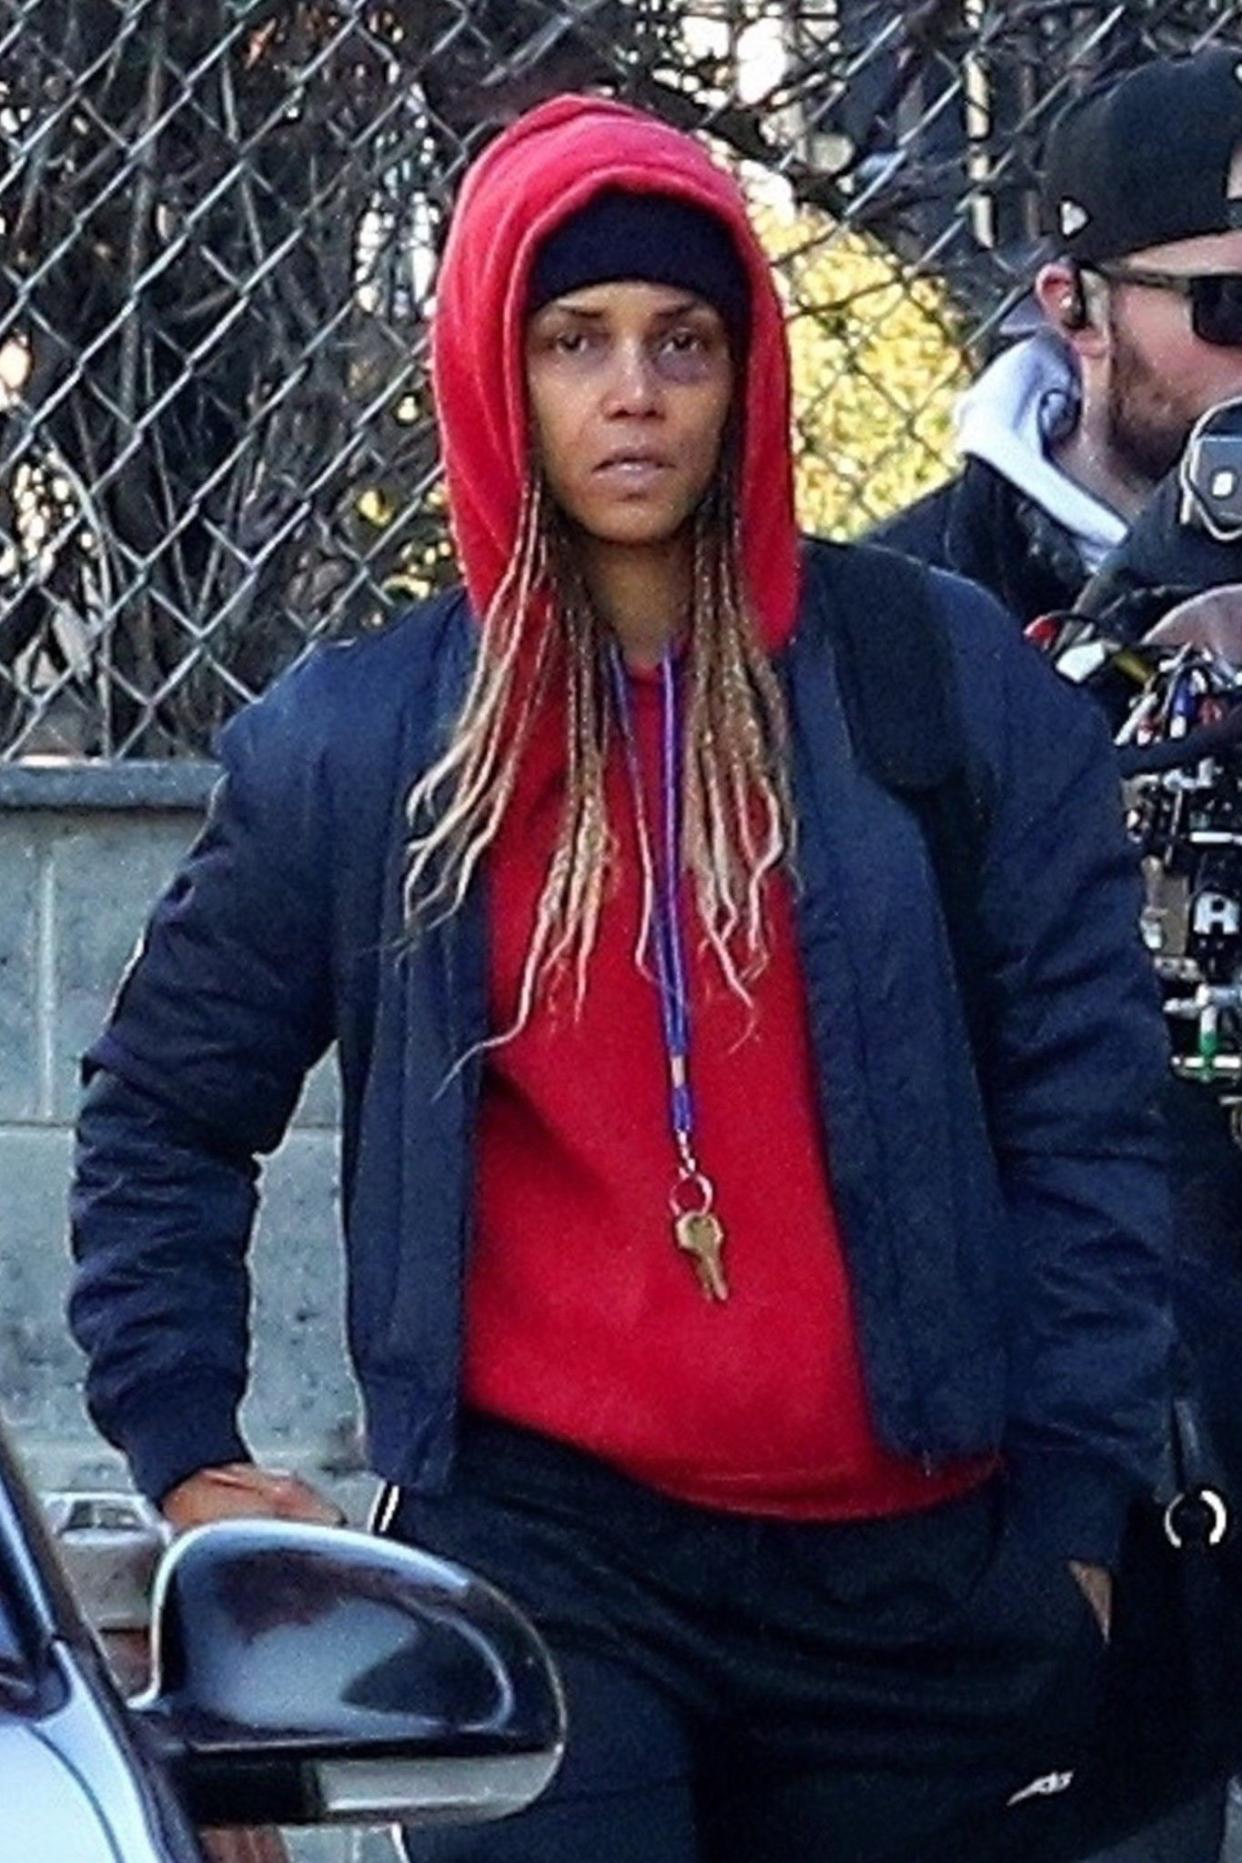 Halle Berry looked every bit the beat-up MMA fighter on the set of her upcoming movie “Bruised” on Dec. 18, 2019 in New Jersey. The actress, who is also the director of the film, sported a large, black eye.